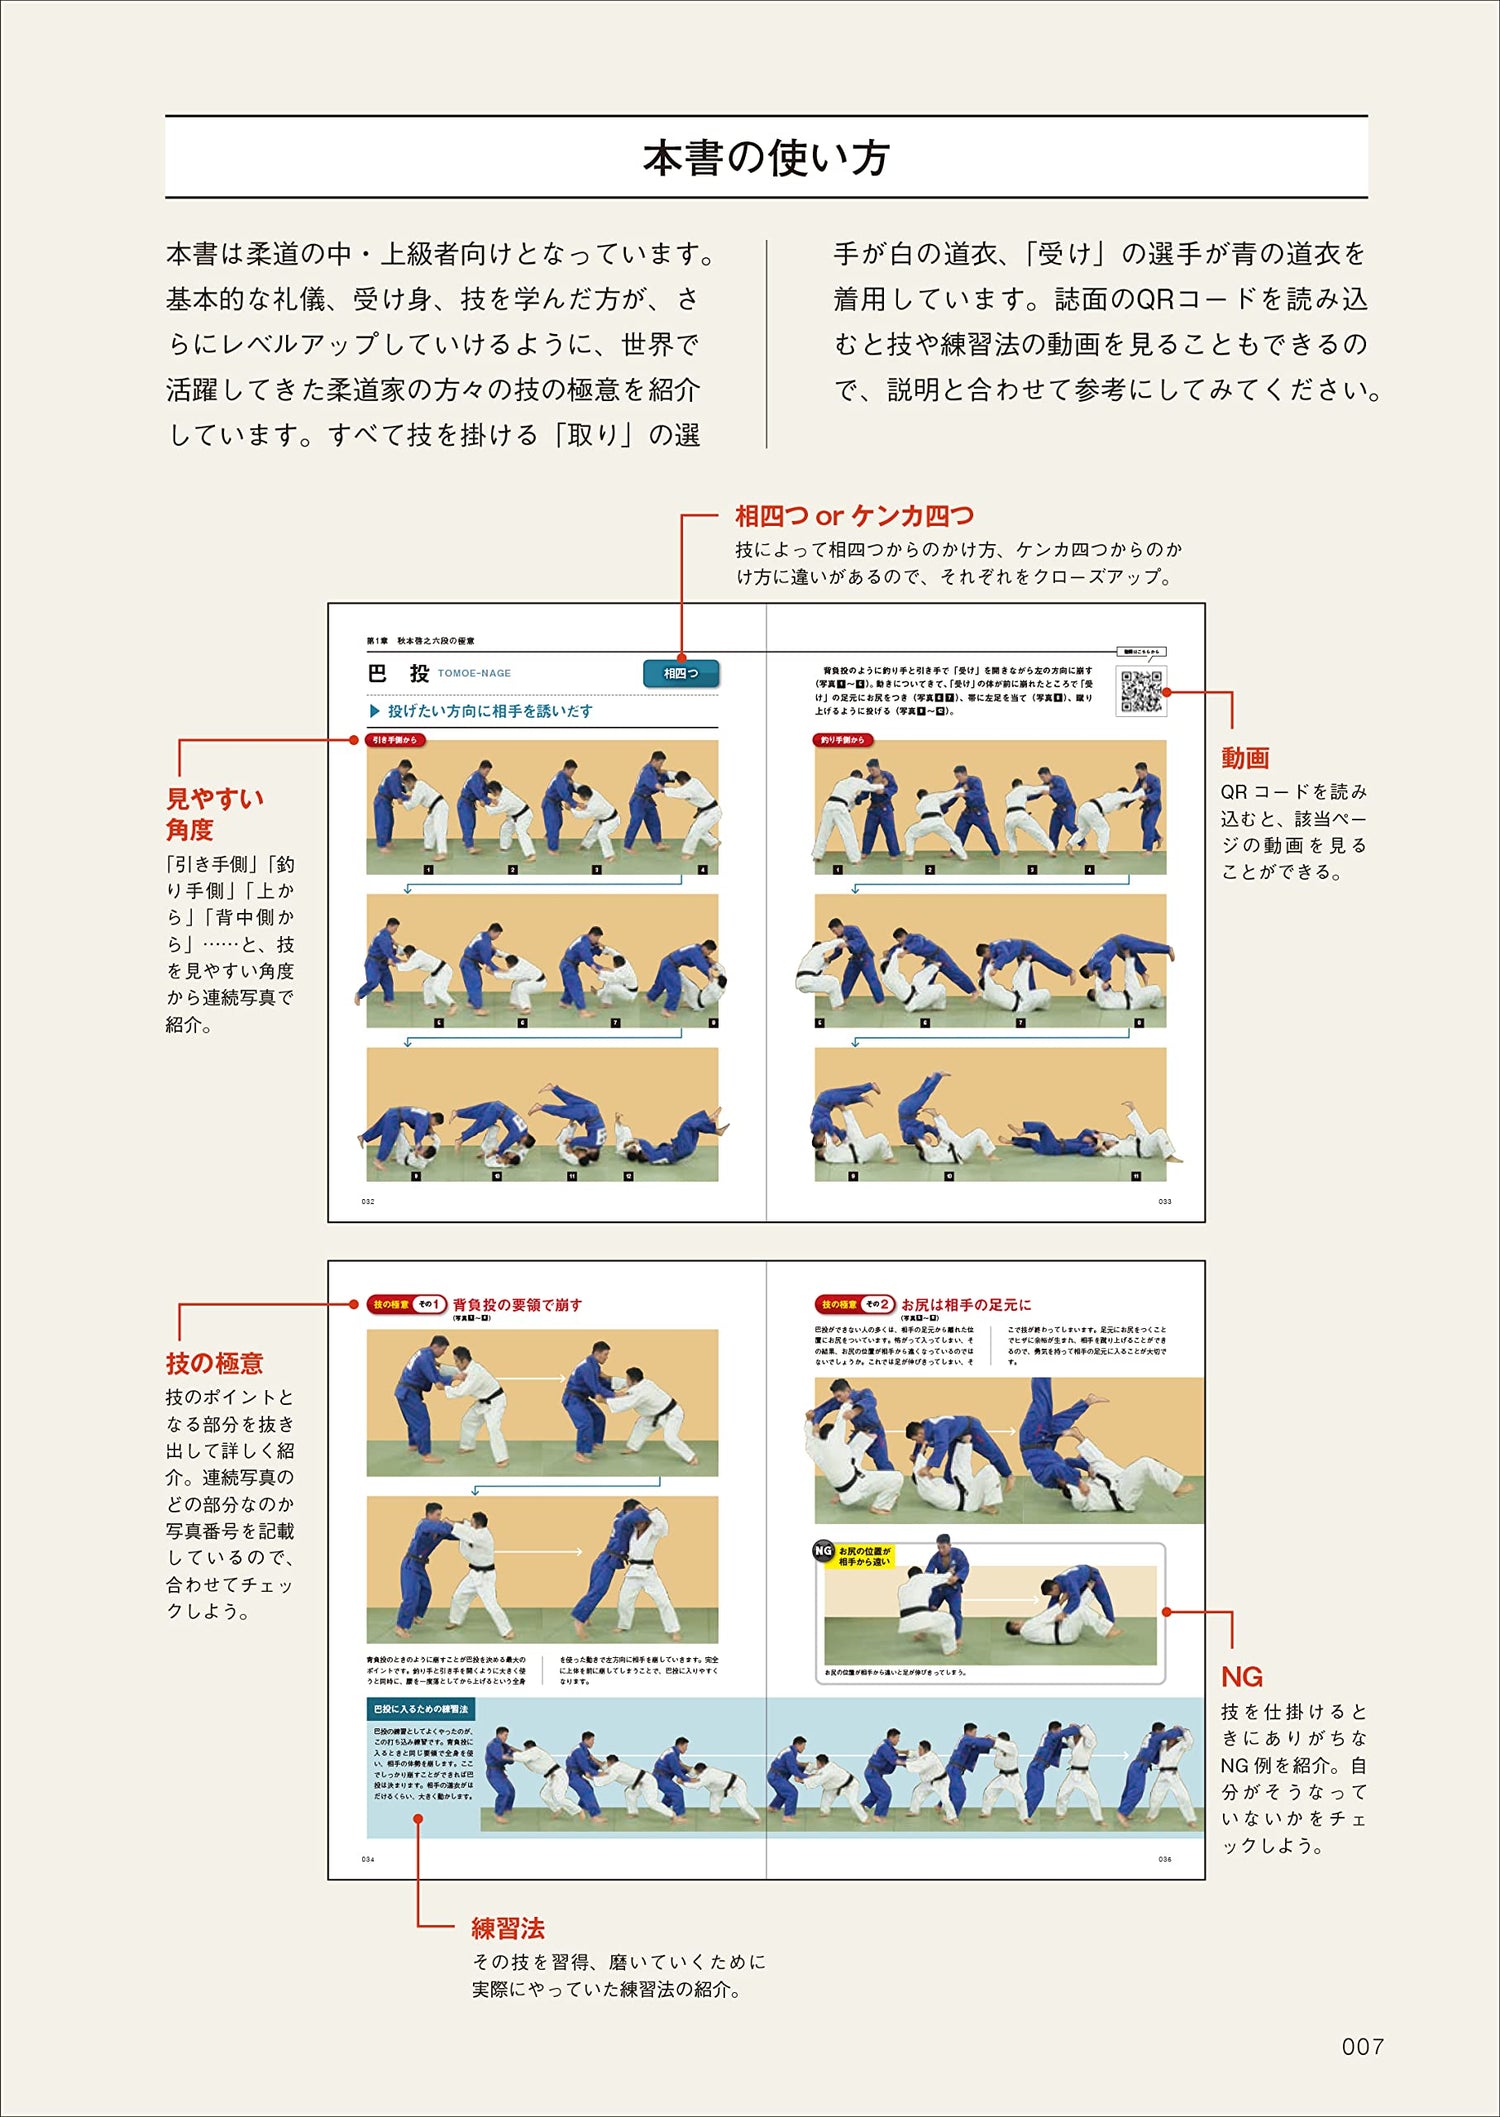 World Judo Secrets for Winning Book (with QR Codes)